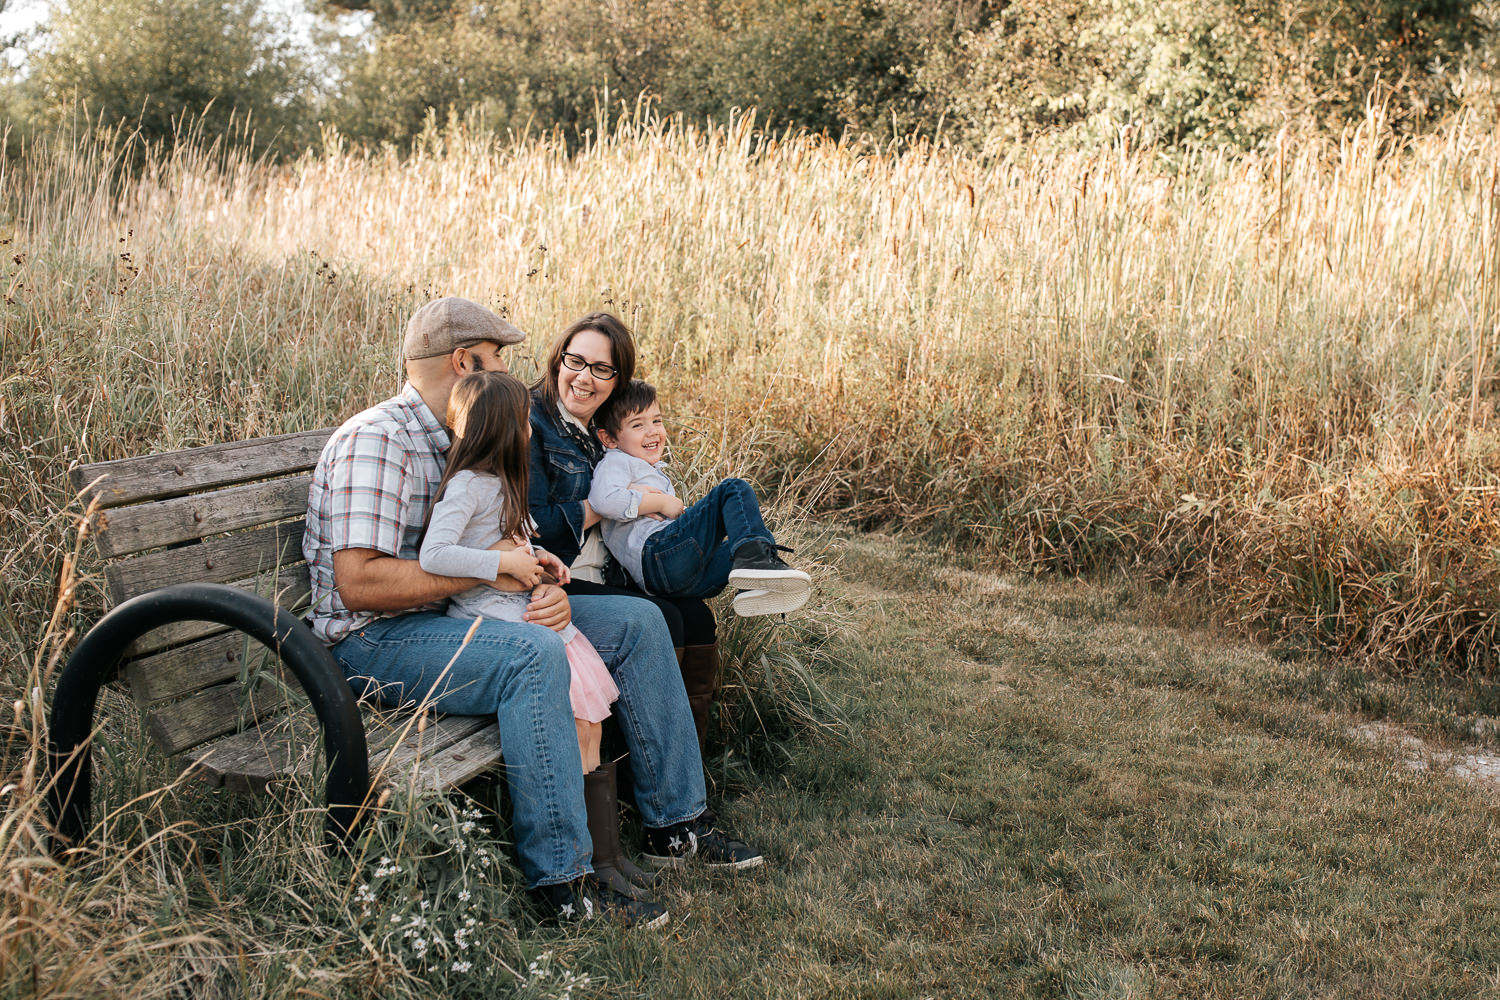 family of 4 sitting on park bench surrounded by tall grasses, 5 year old girl sitting on dad's lap, 4 year old boy in mom's lap smiling - Barrie Lifestyle Photography